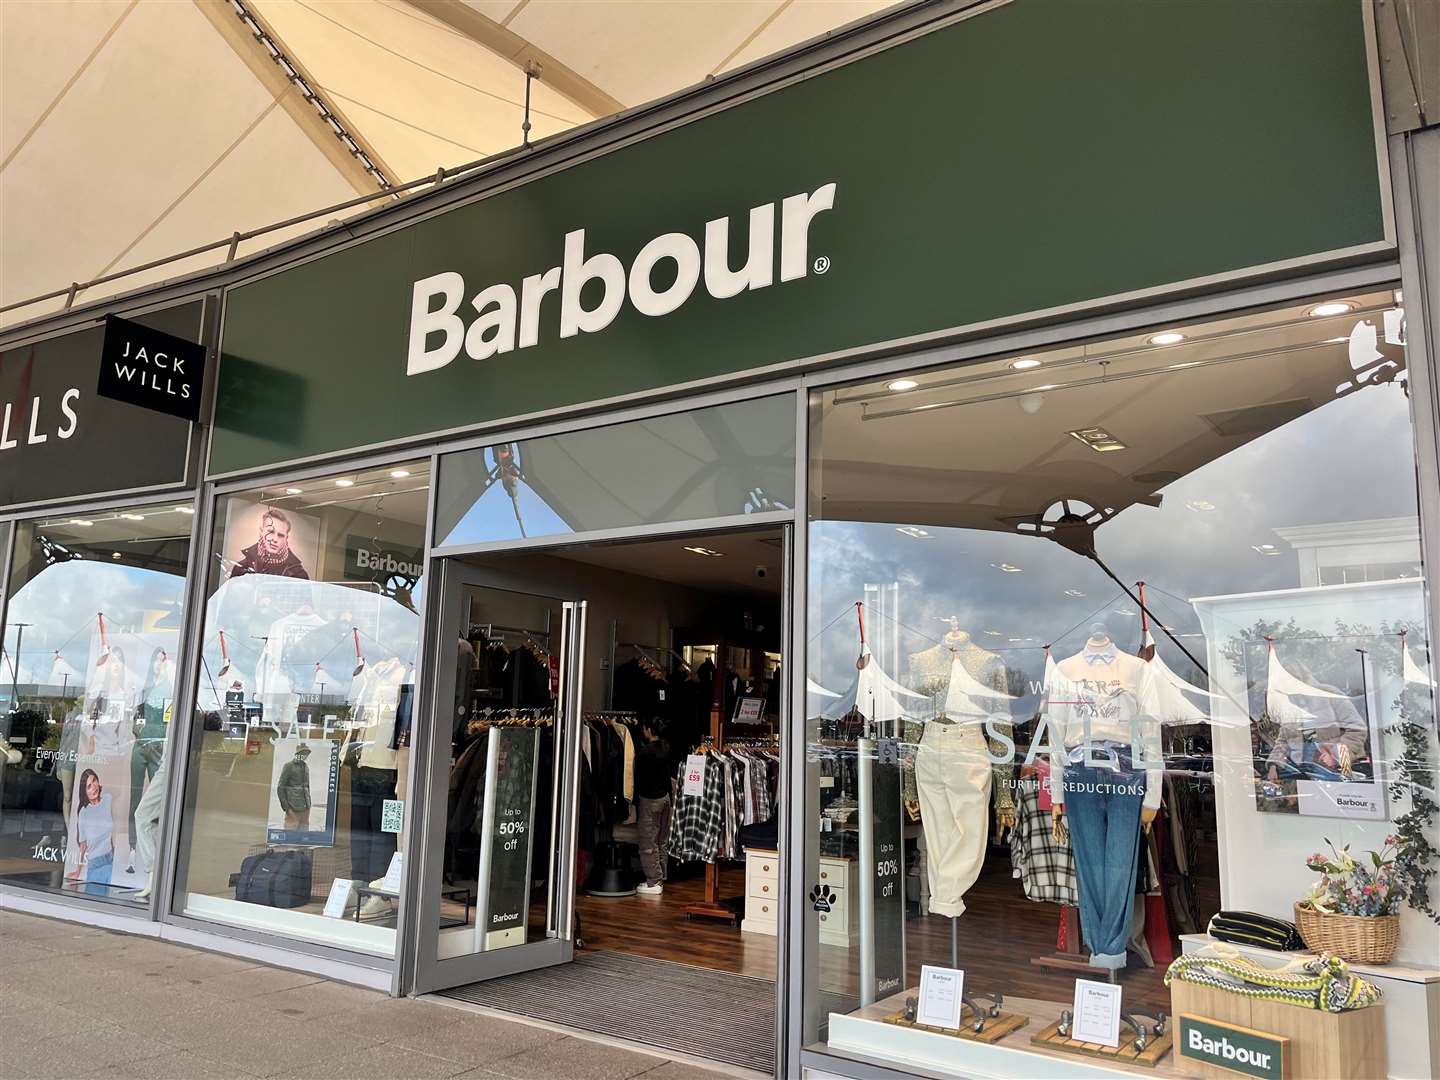 The existing Barbour store